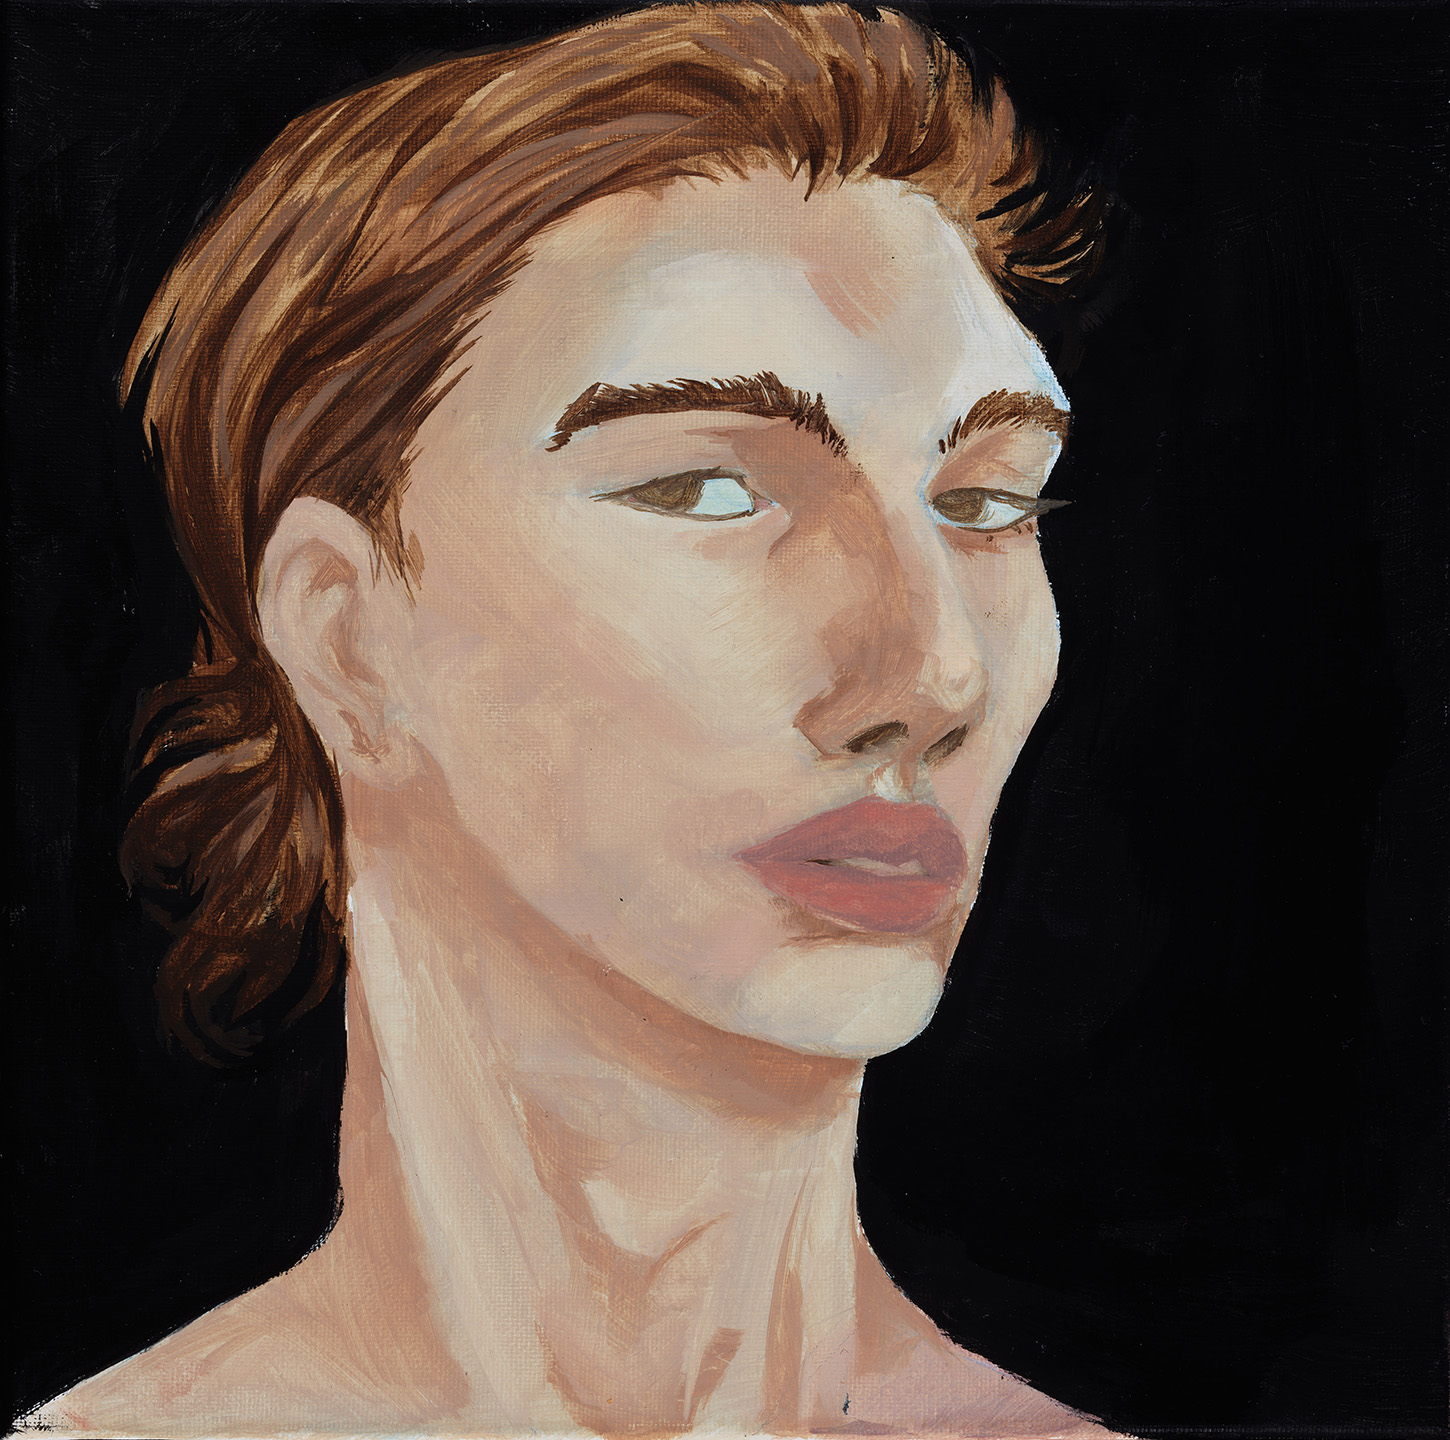 Painted portrait of a person's face and neck, looking towards the viewer from side of eyes